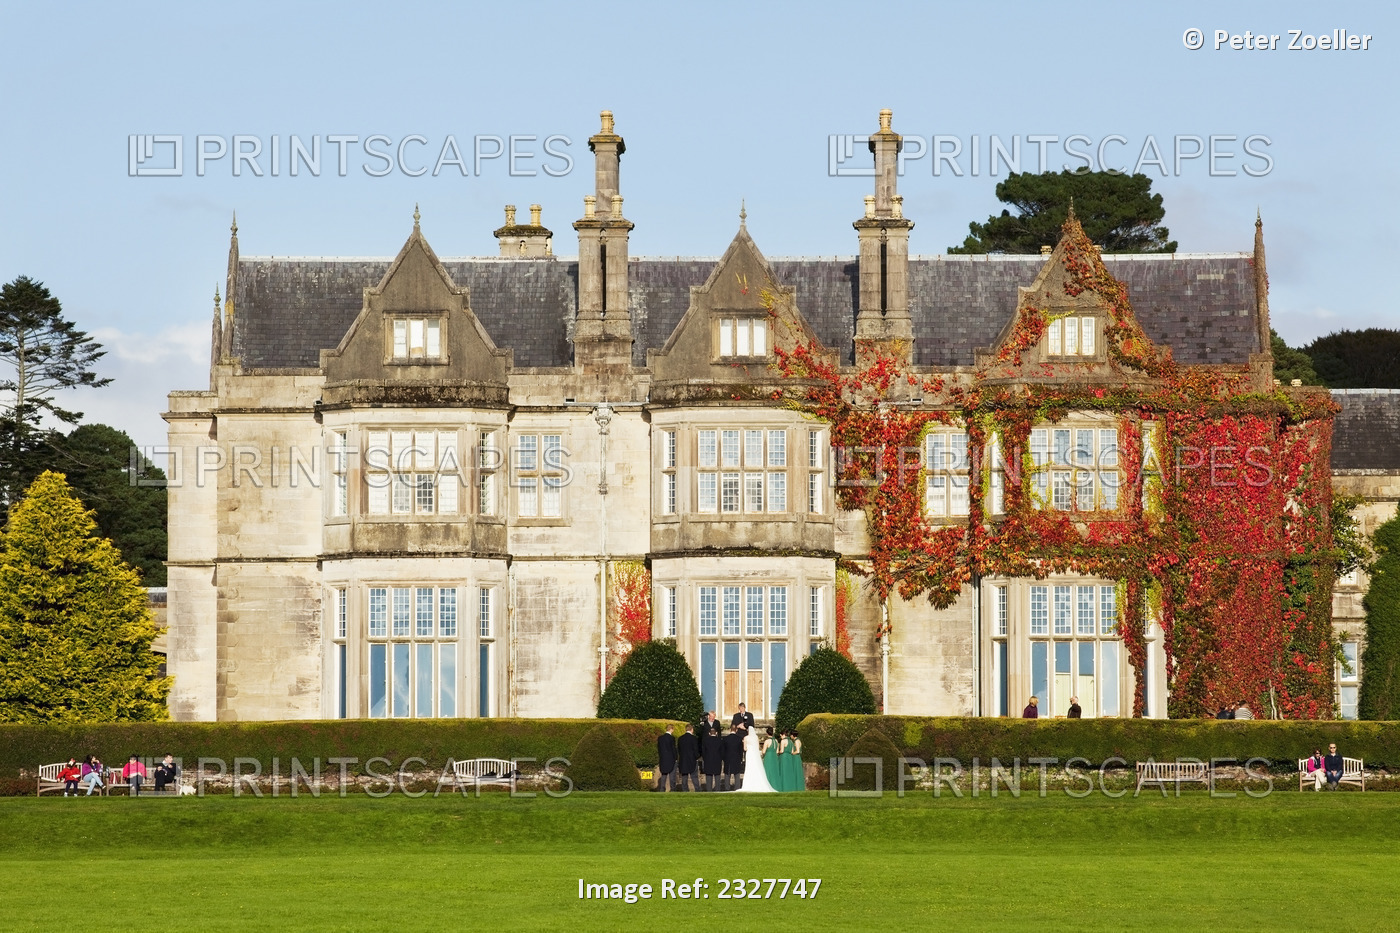 A wedding being performed outside muckross house; Killarney county kerry ireland